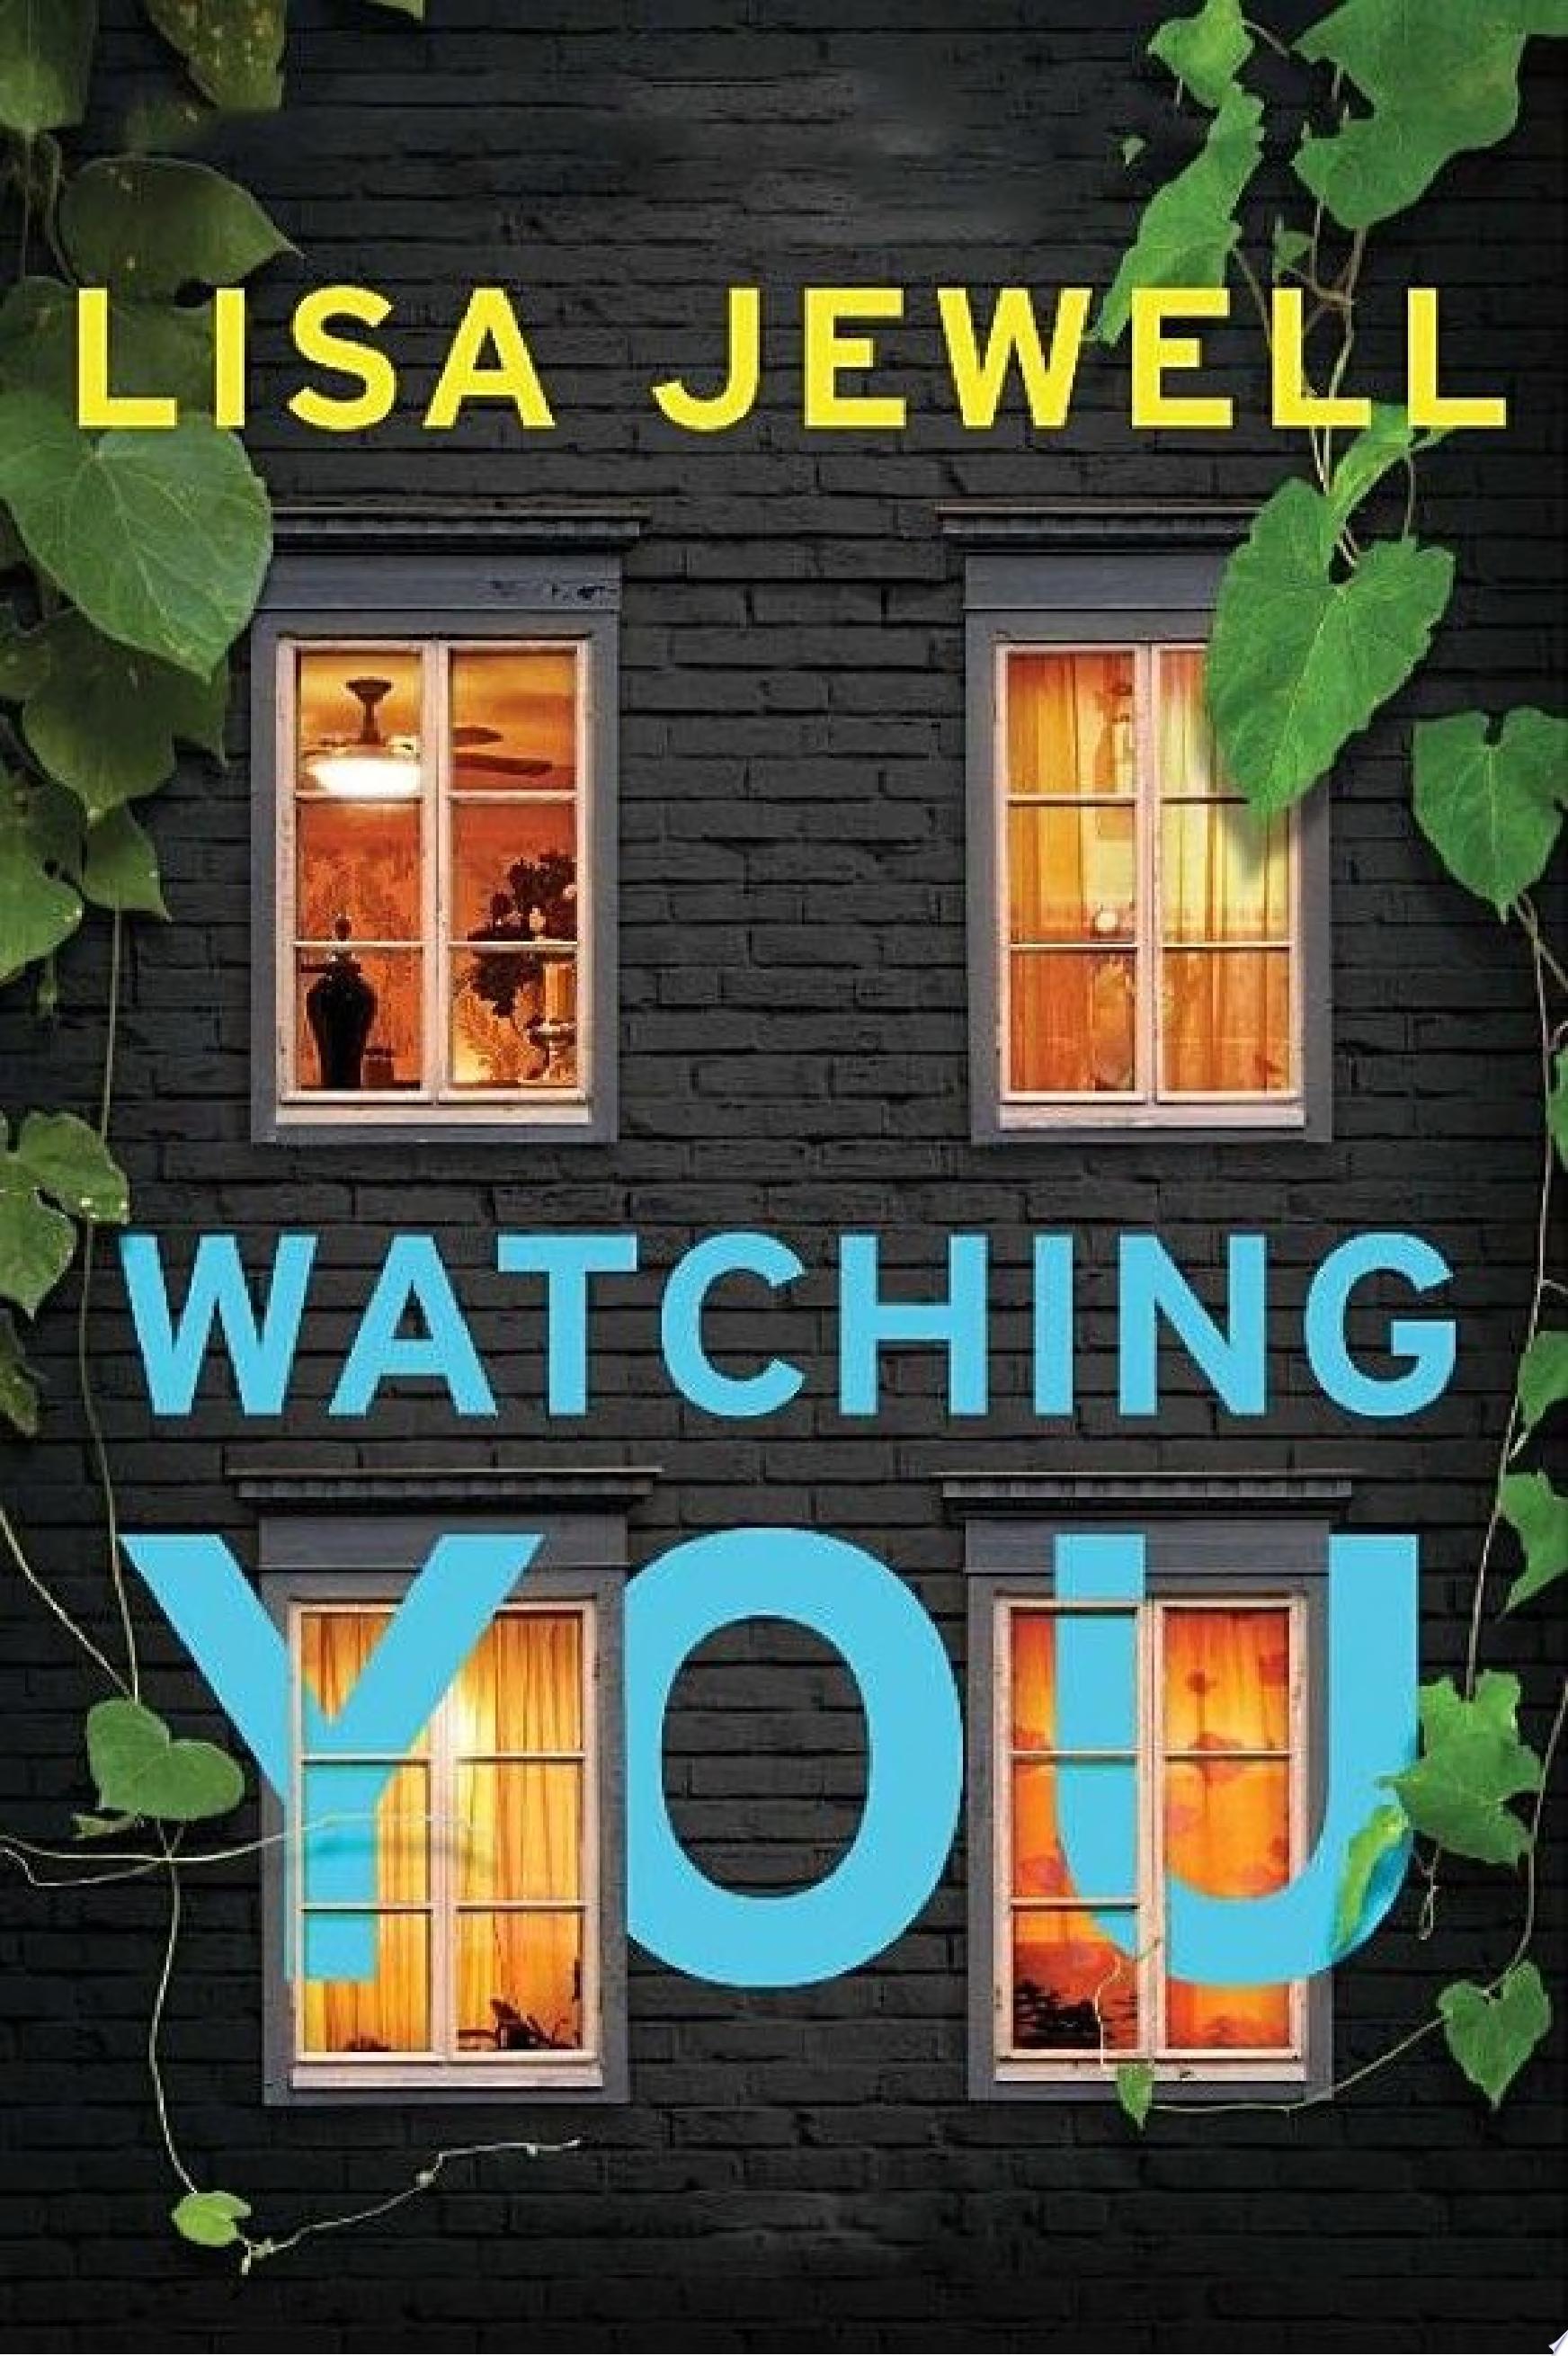 Image for "Watching You"